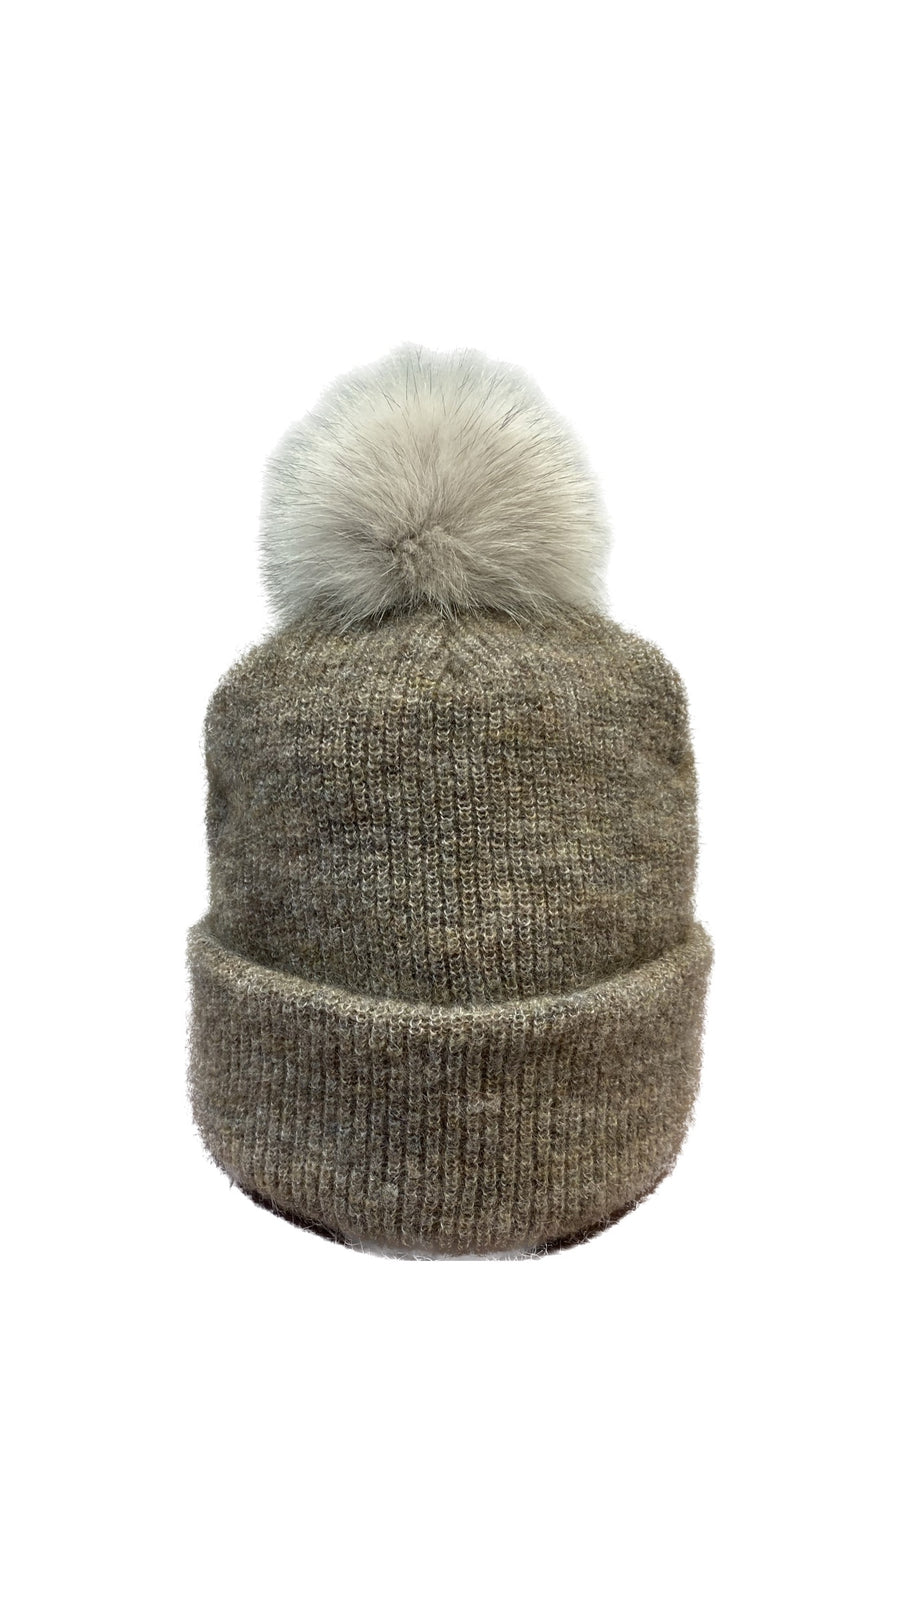 Beanie woolly hat, Designed and Made in Finland